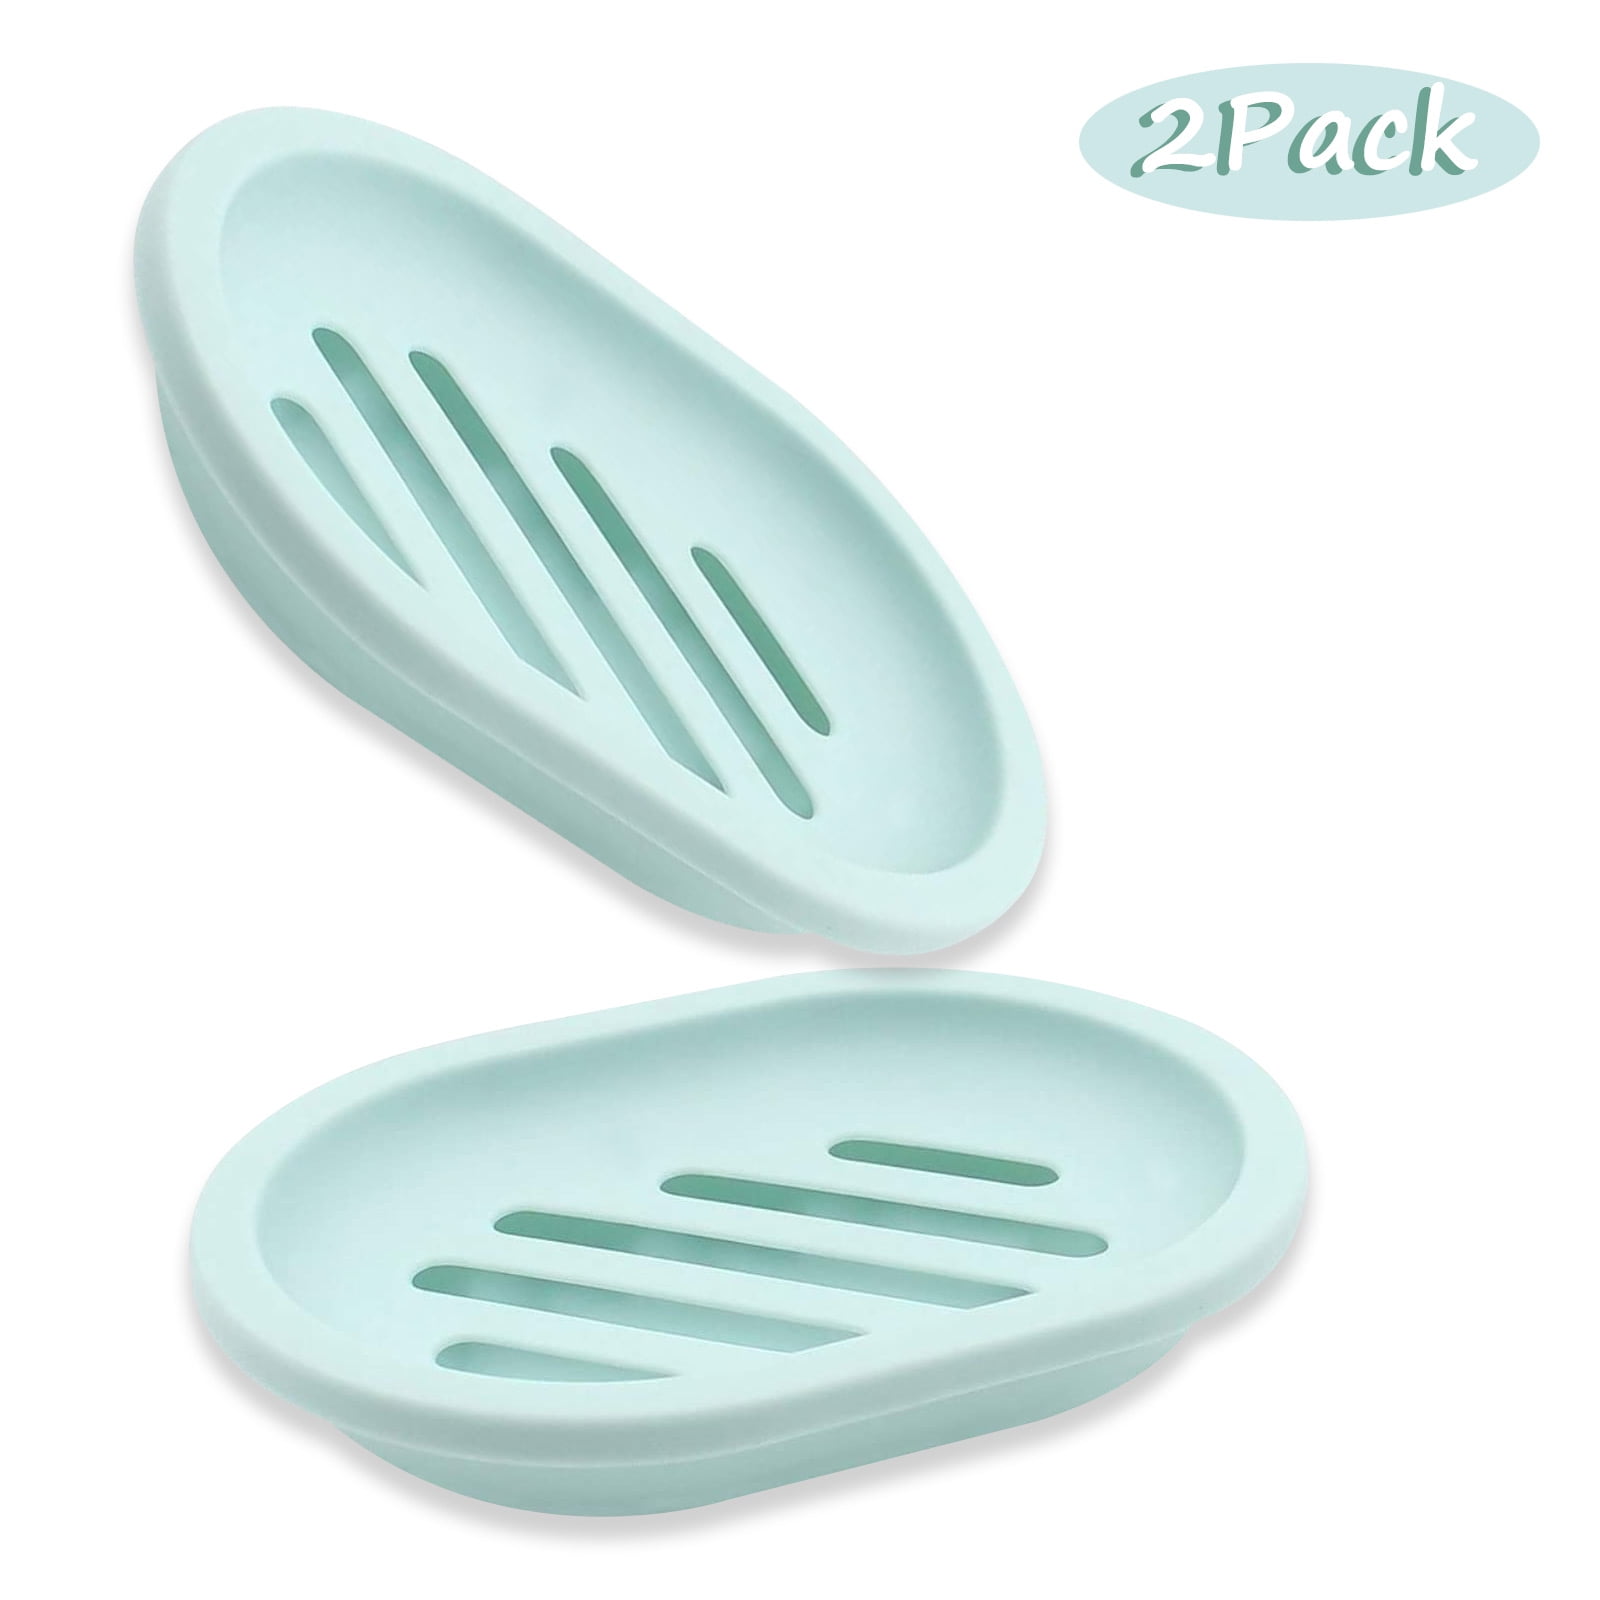 NEW INTERDESIGN Clear Oval Soap Dish Holder 2-Pack 30100 